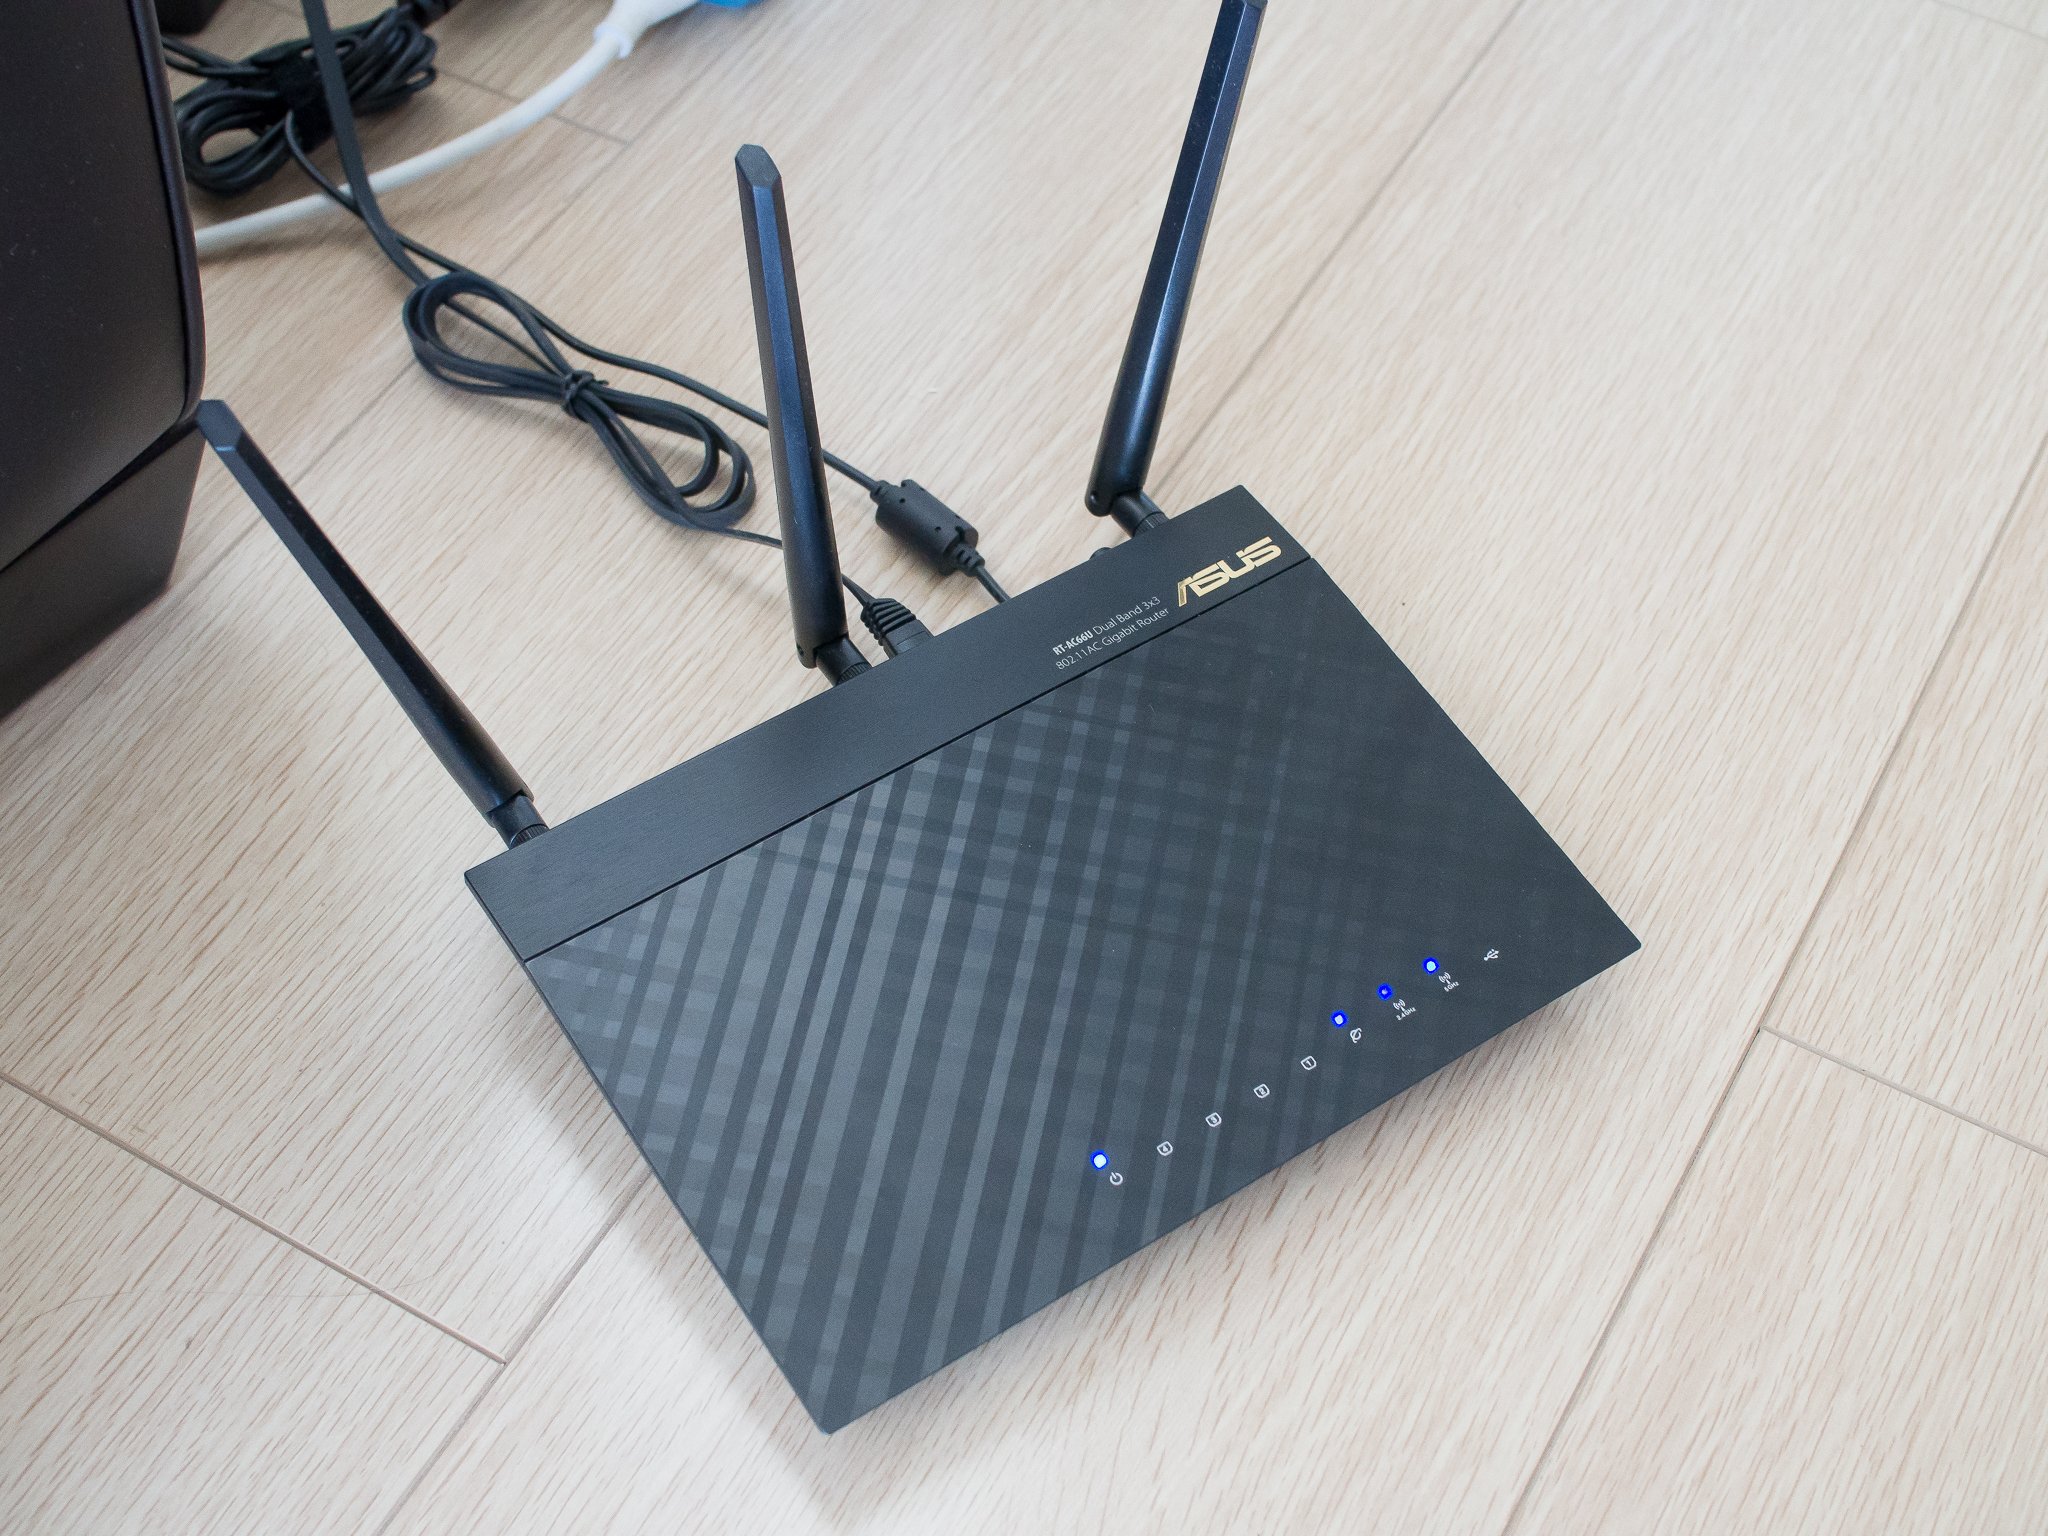 asus-router-1axnb_1.jpg